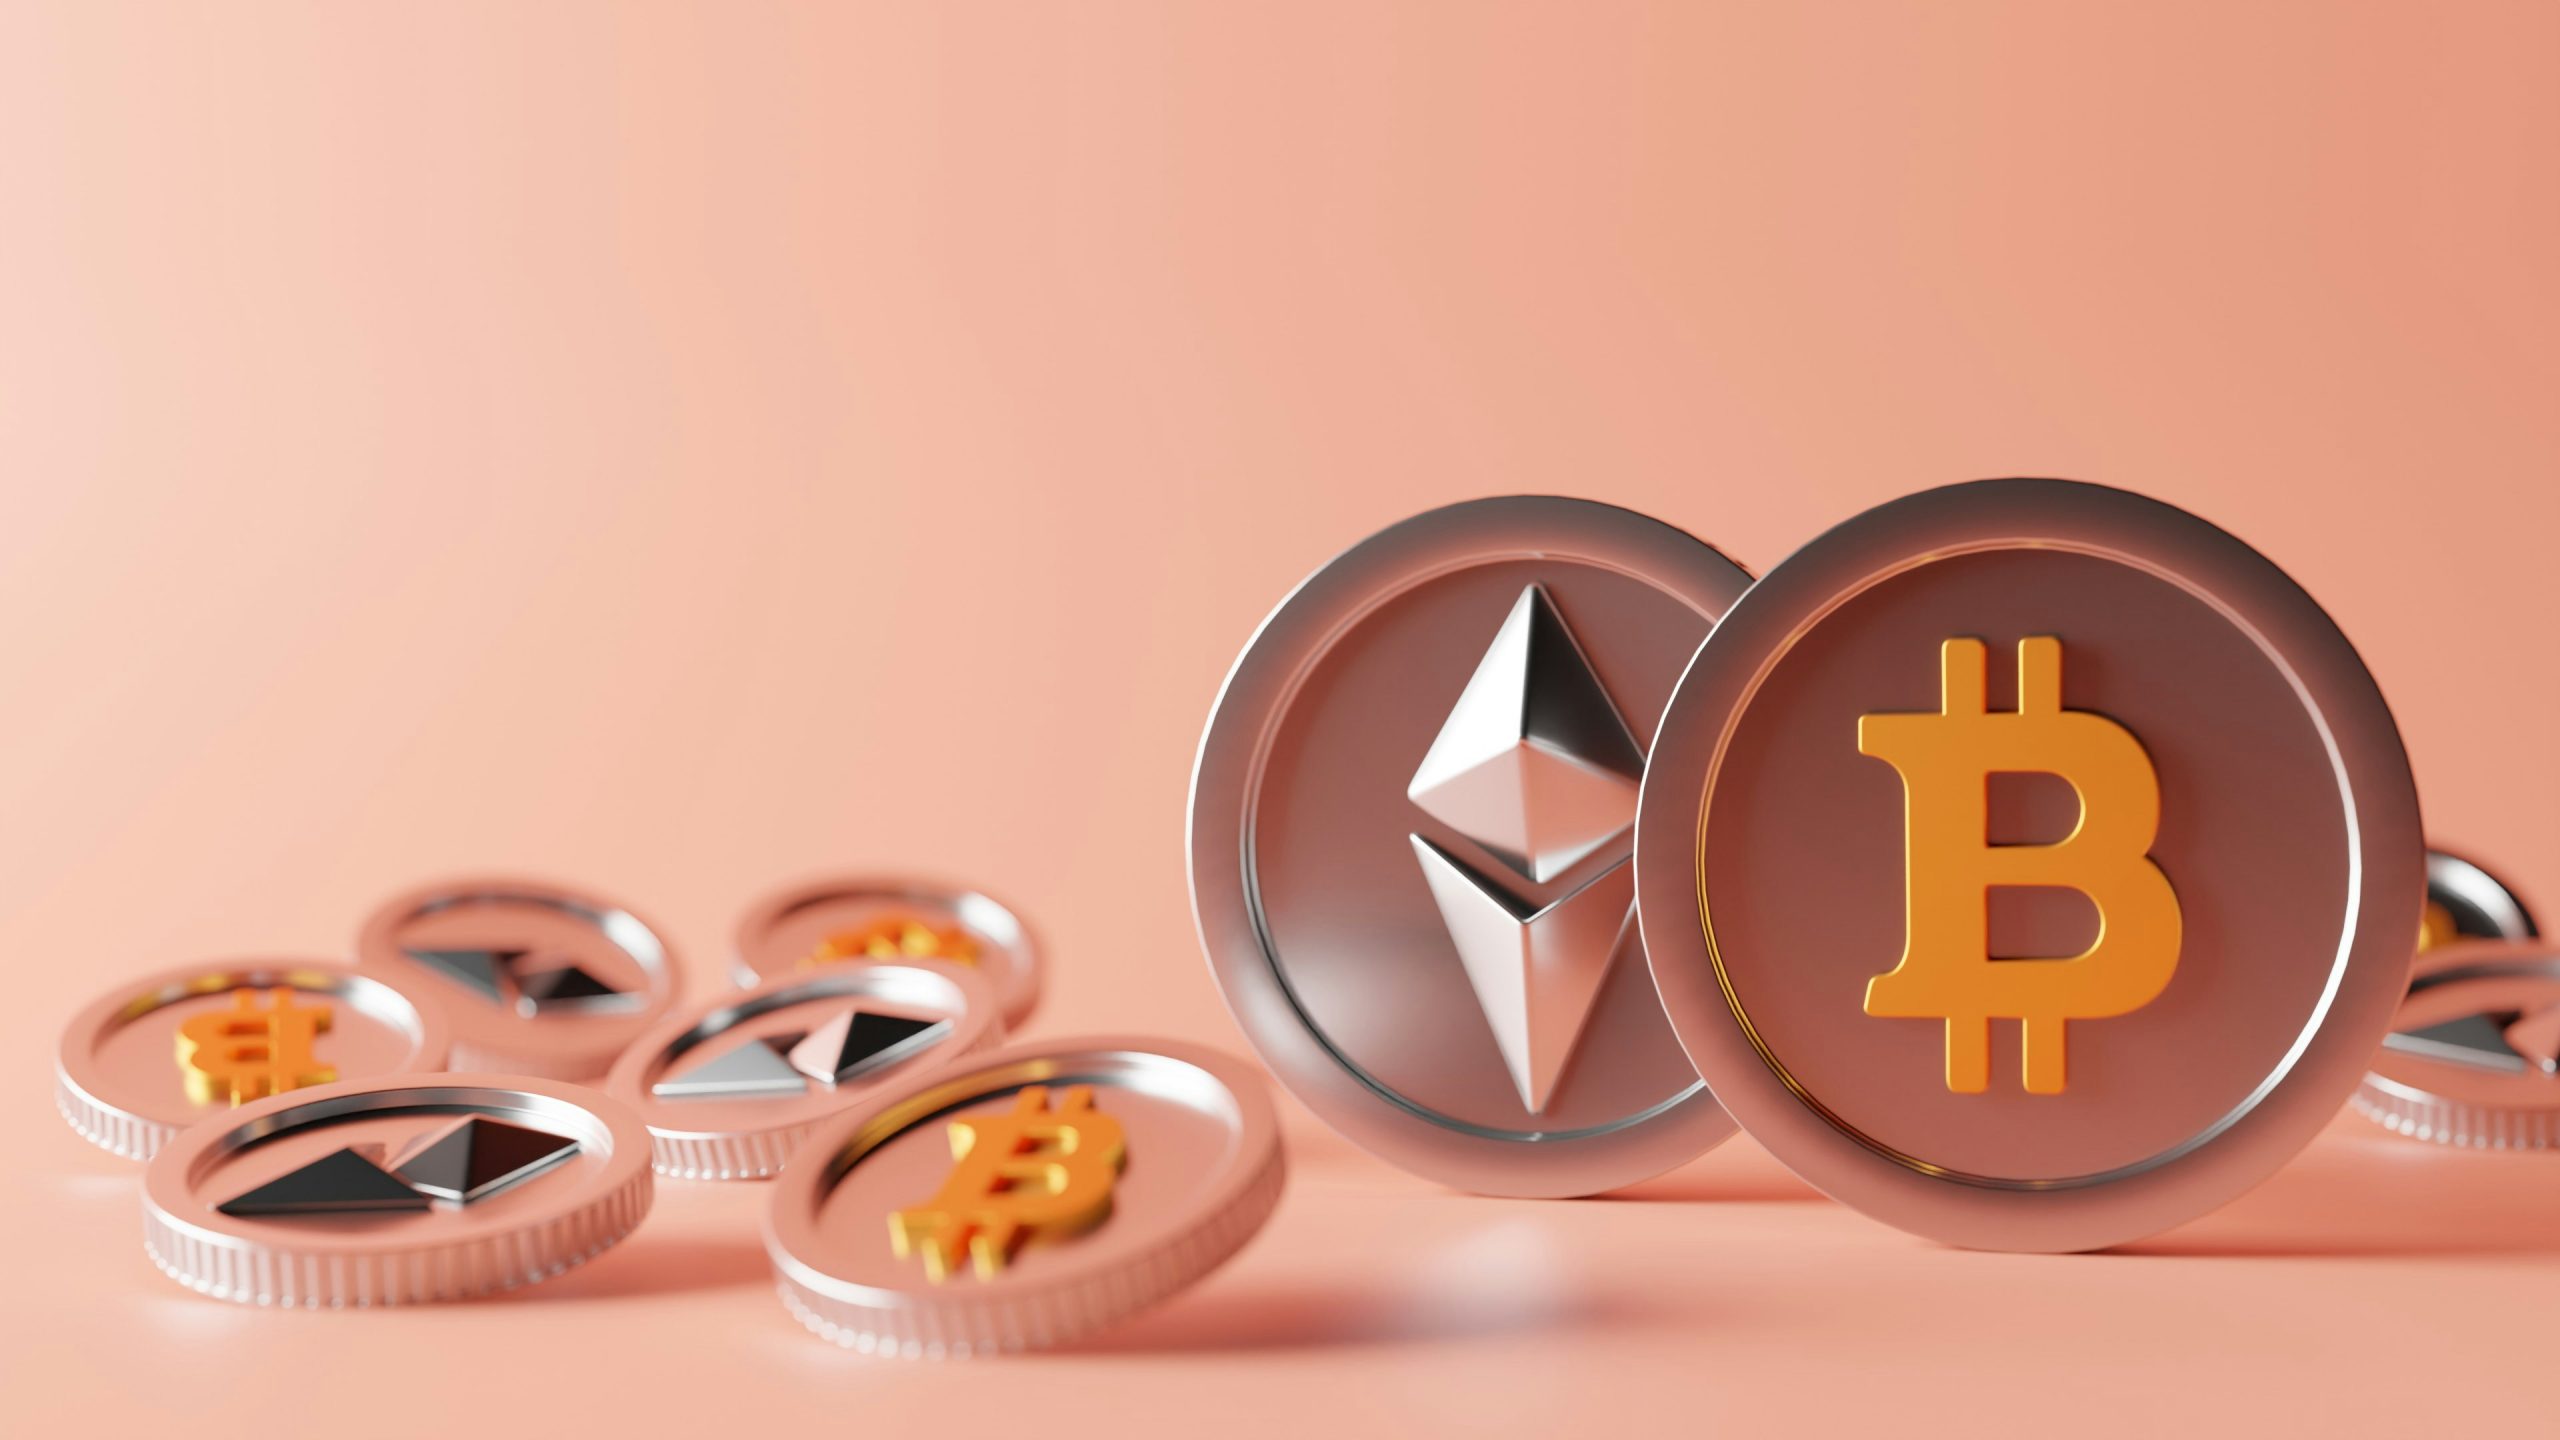 coins symbolising Ethereum and Bitcoin against a light pink background